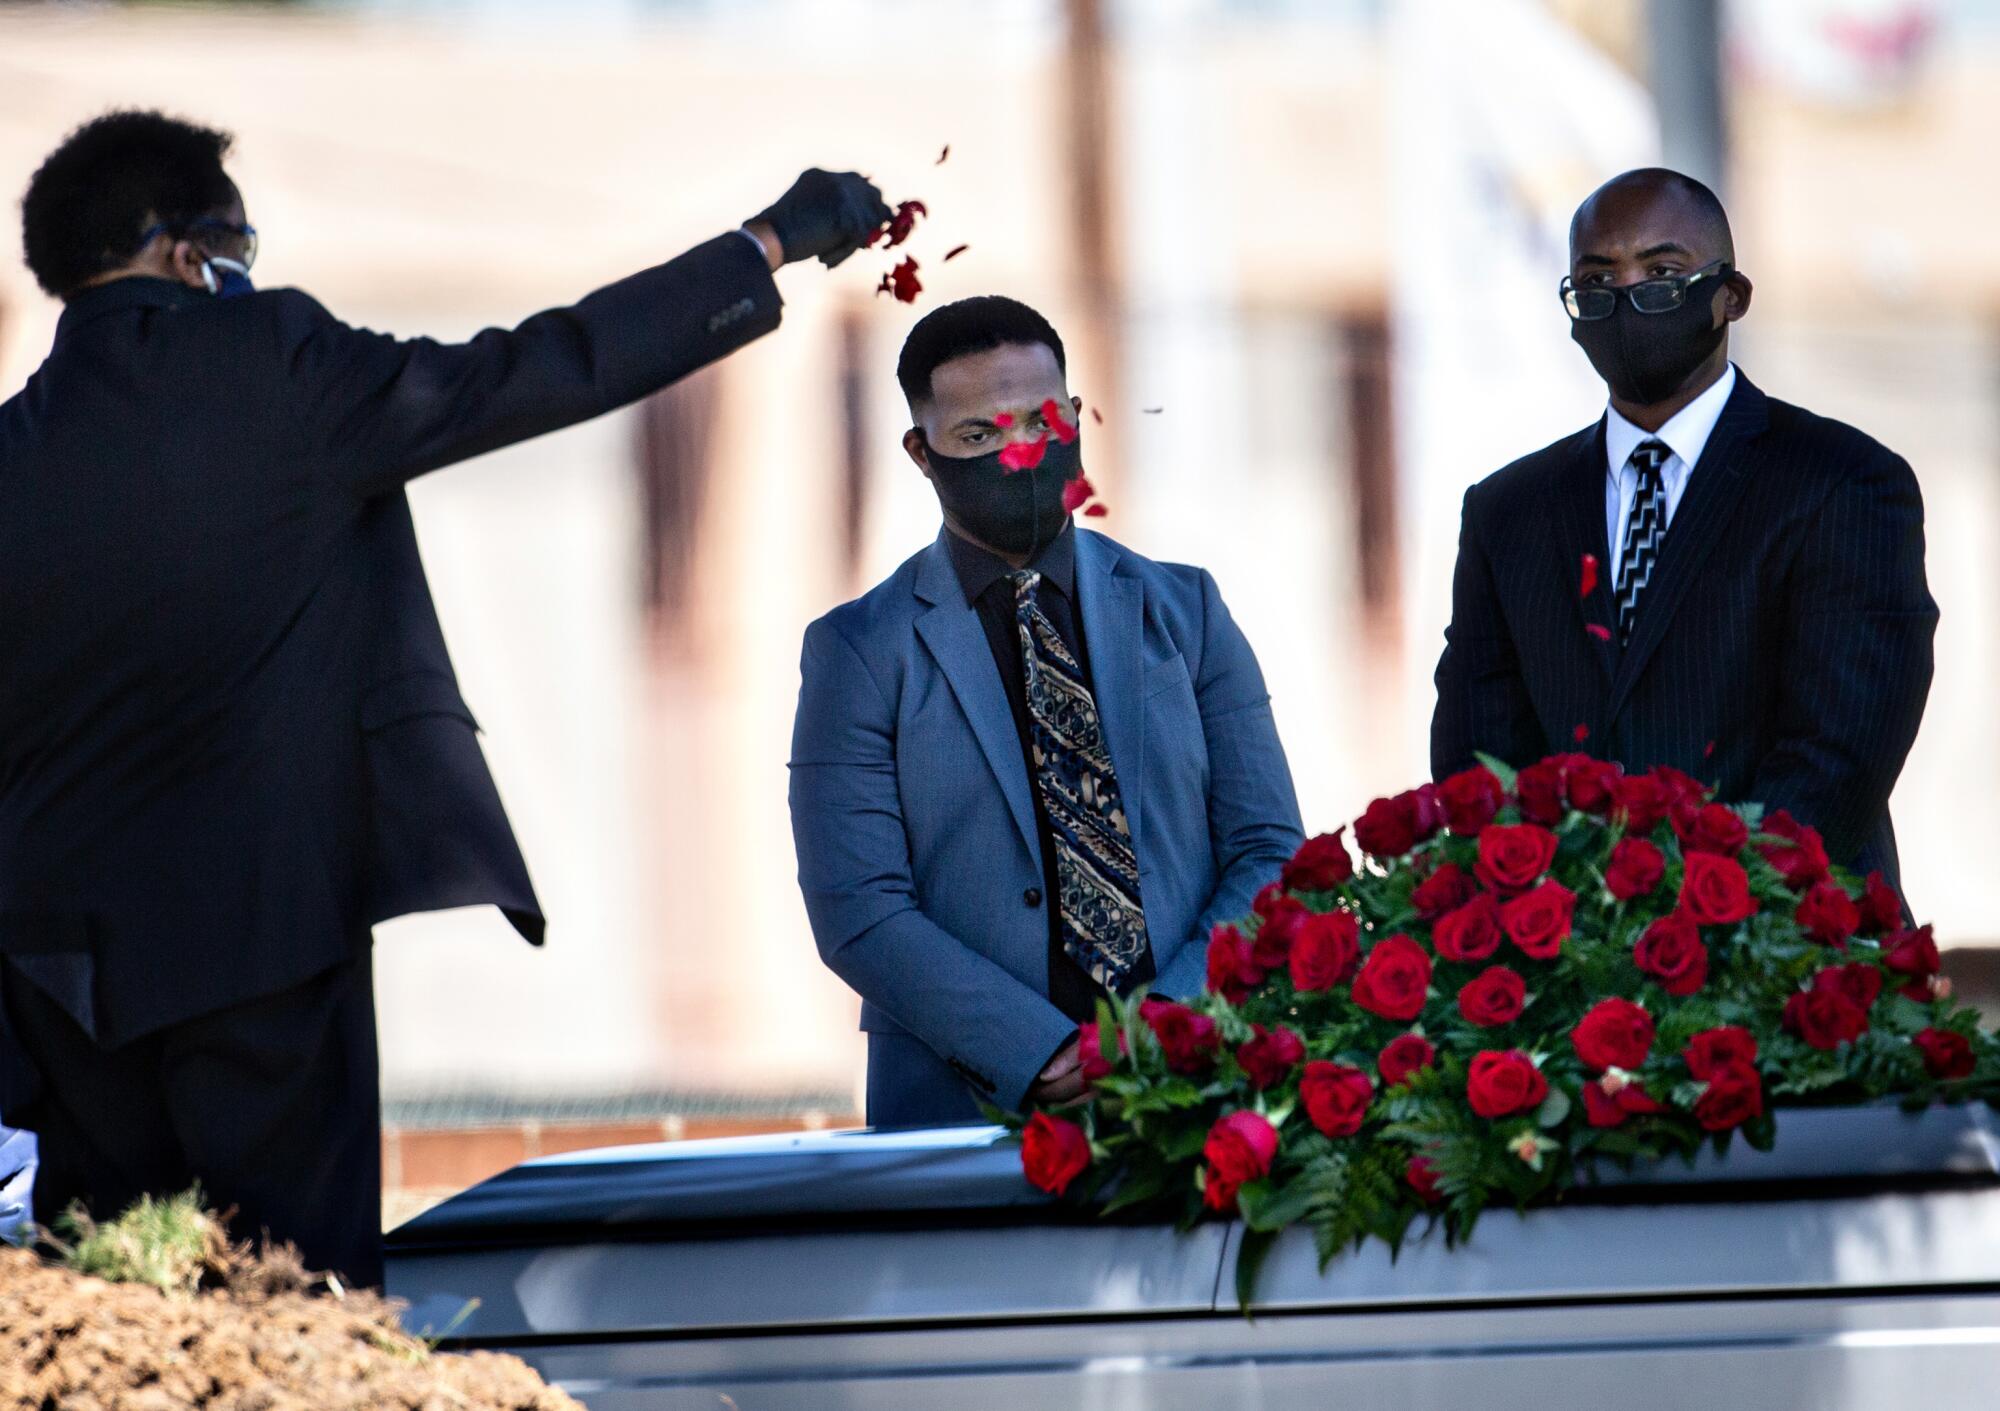 James Plummer, funeral director at Angelus Funeral Home in Los Angeles, sprinkles rose petals over the casket as Nicholas Jackson, center, mourns his father, Charles Jackson Jr.